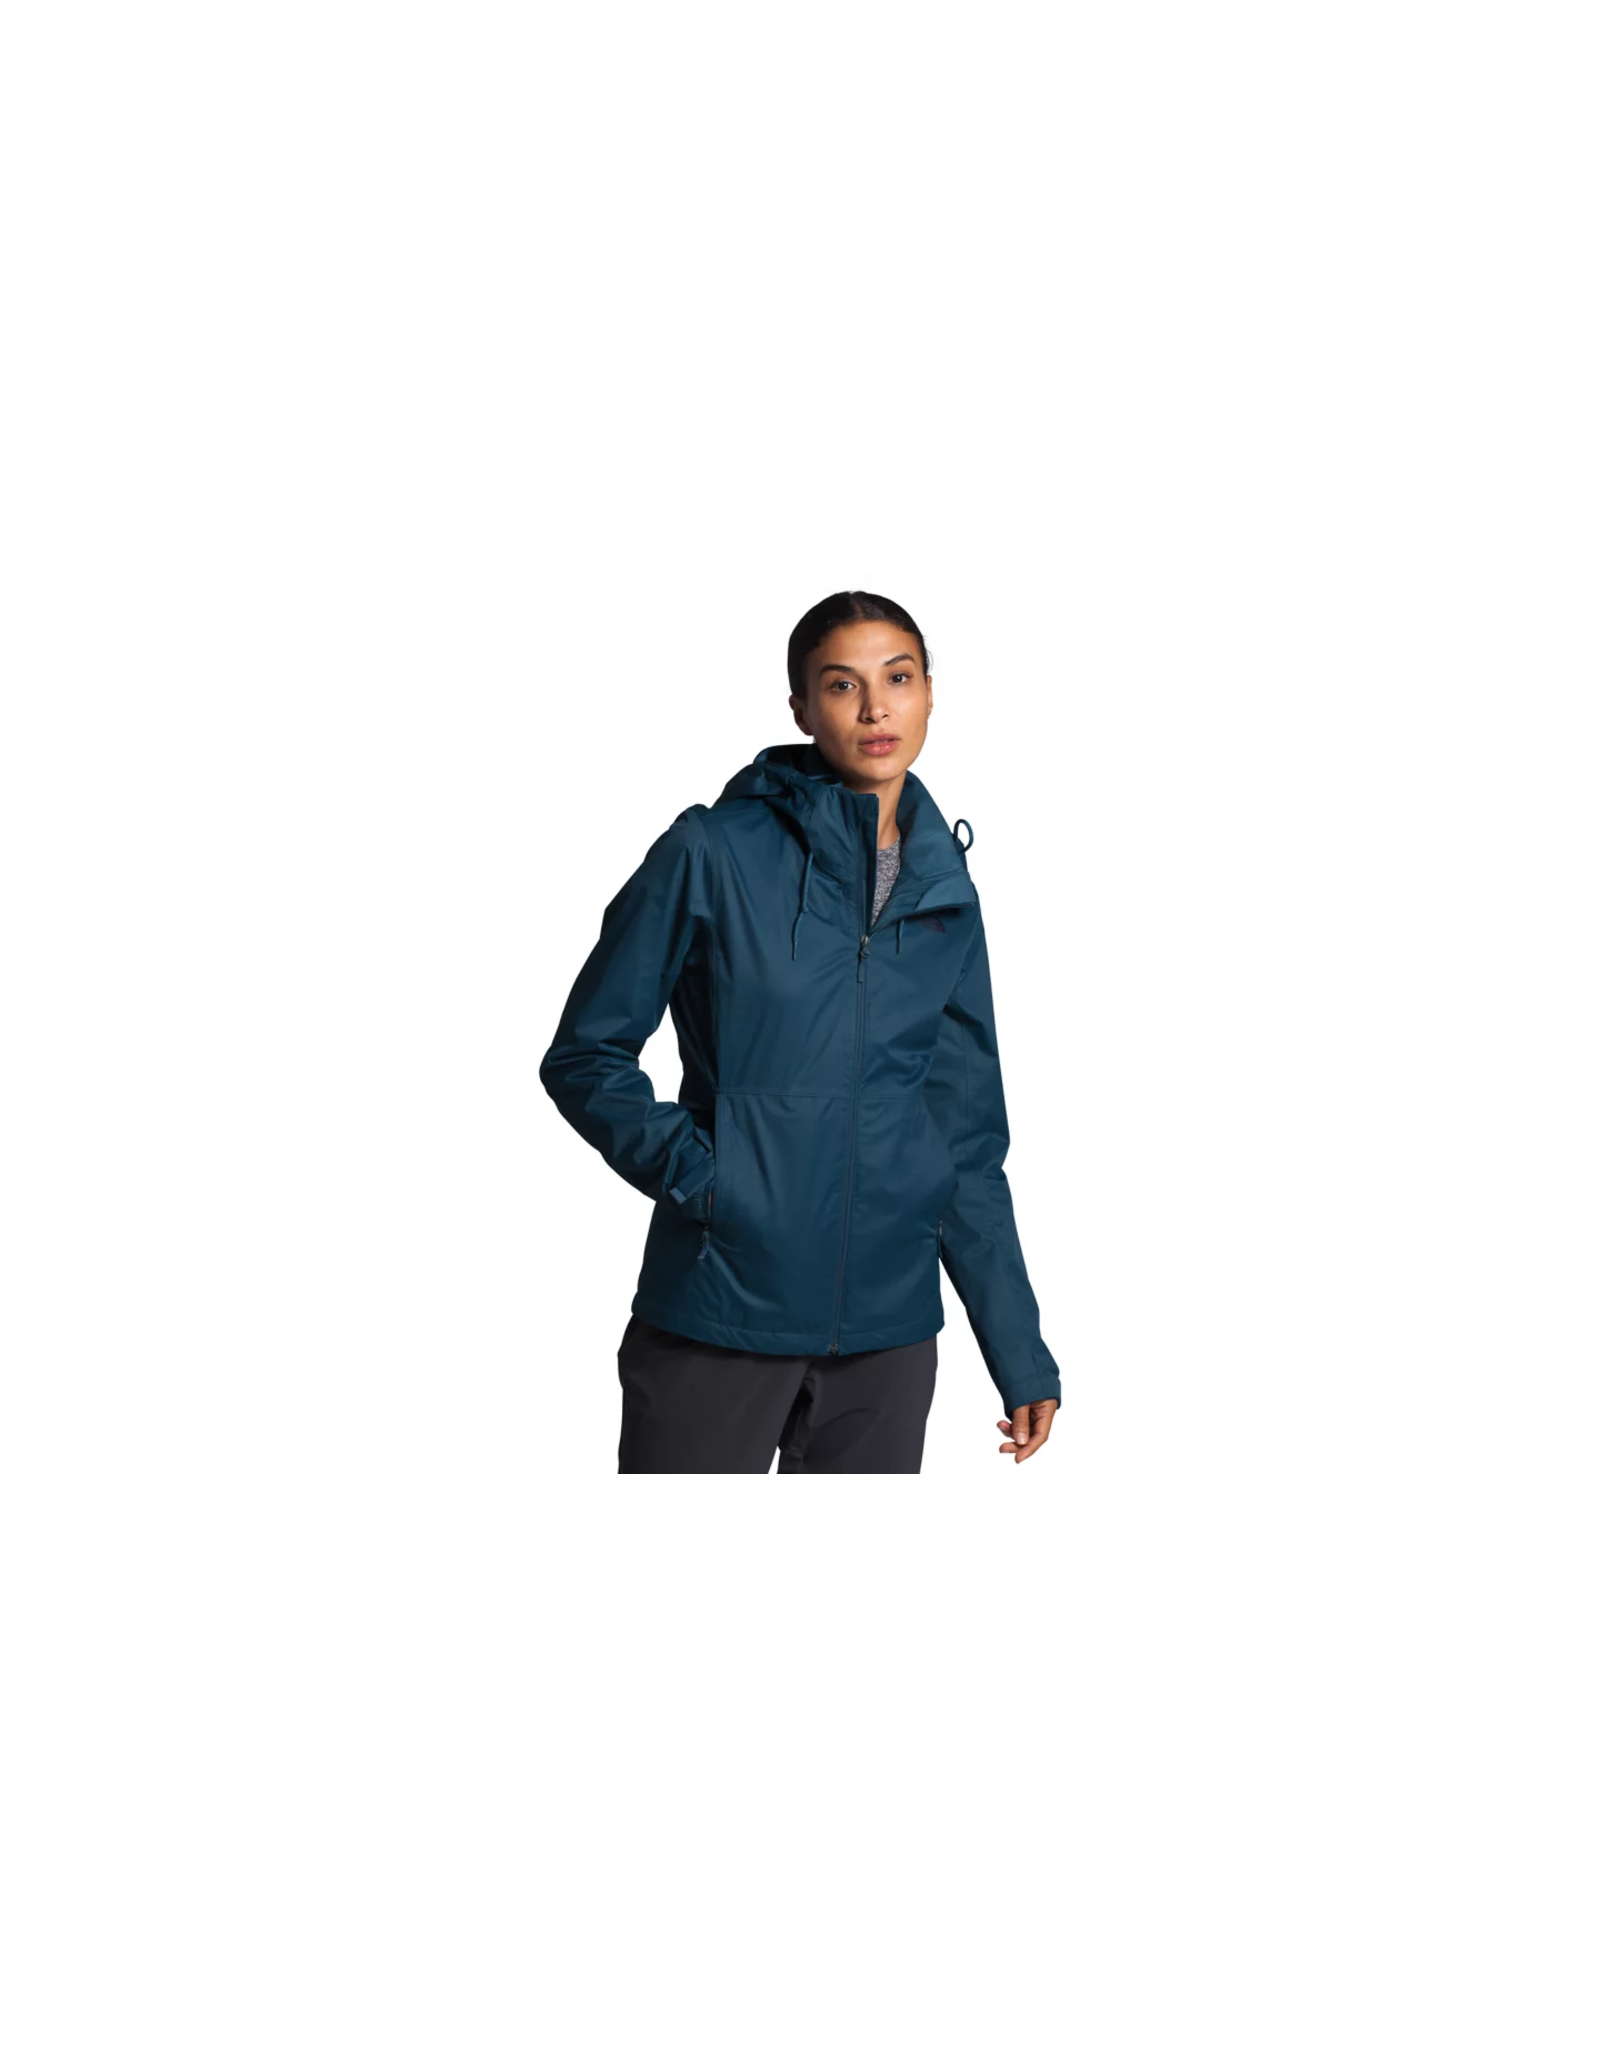 north face arrowood triclimate jacket womens